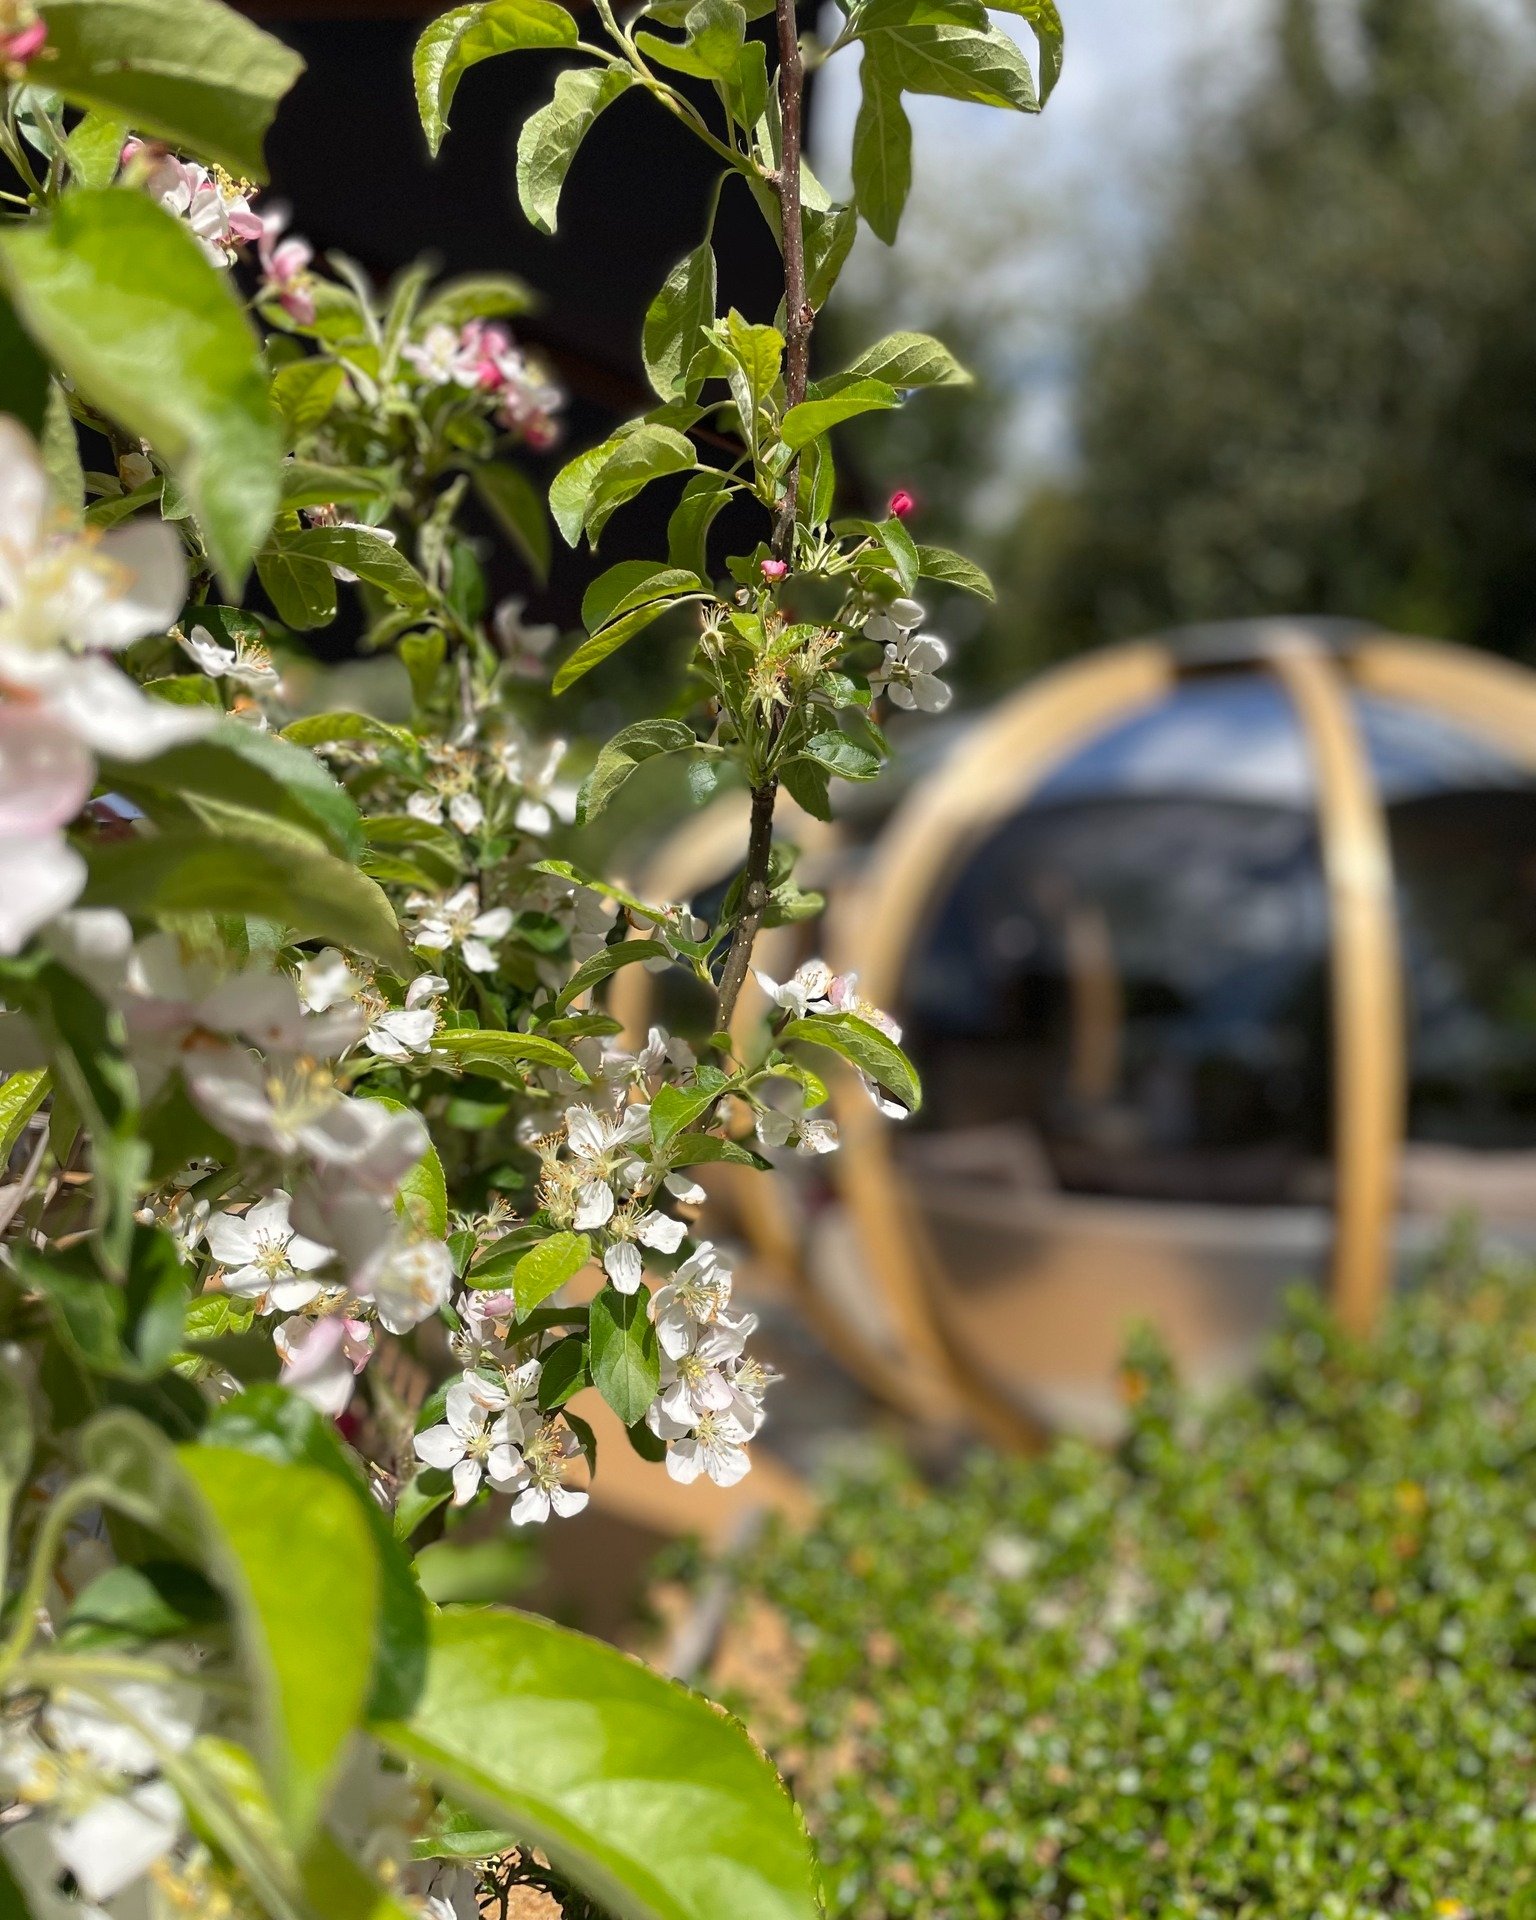 The blossom is out and the new menu is a seasonal delight and the temperature is on the rise. Come and enjoy alfresco dining at The Cock this weekend.

Bookings at https://thecockhemingford.co.uk/

#thecockathemingfordgrey #springmenu #alfrescodining